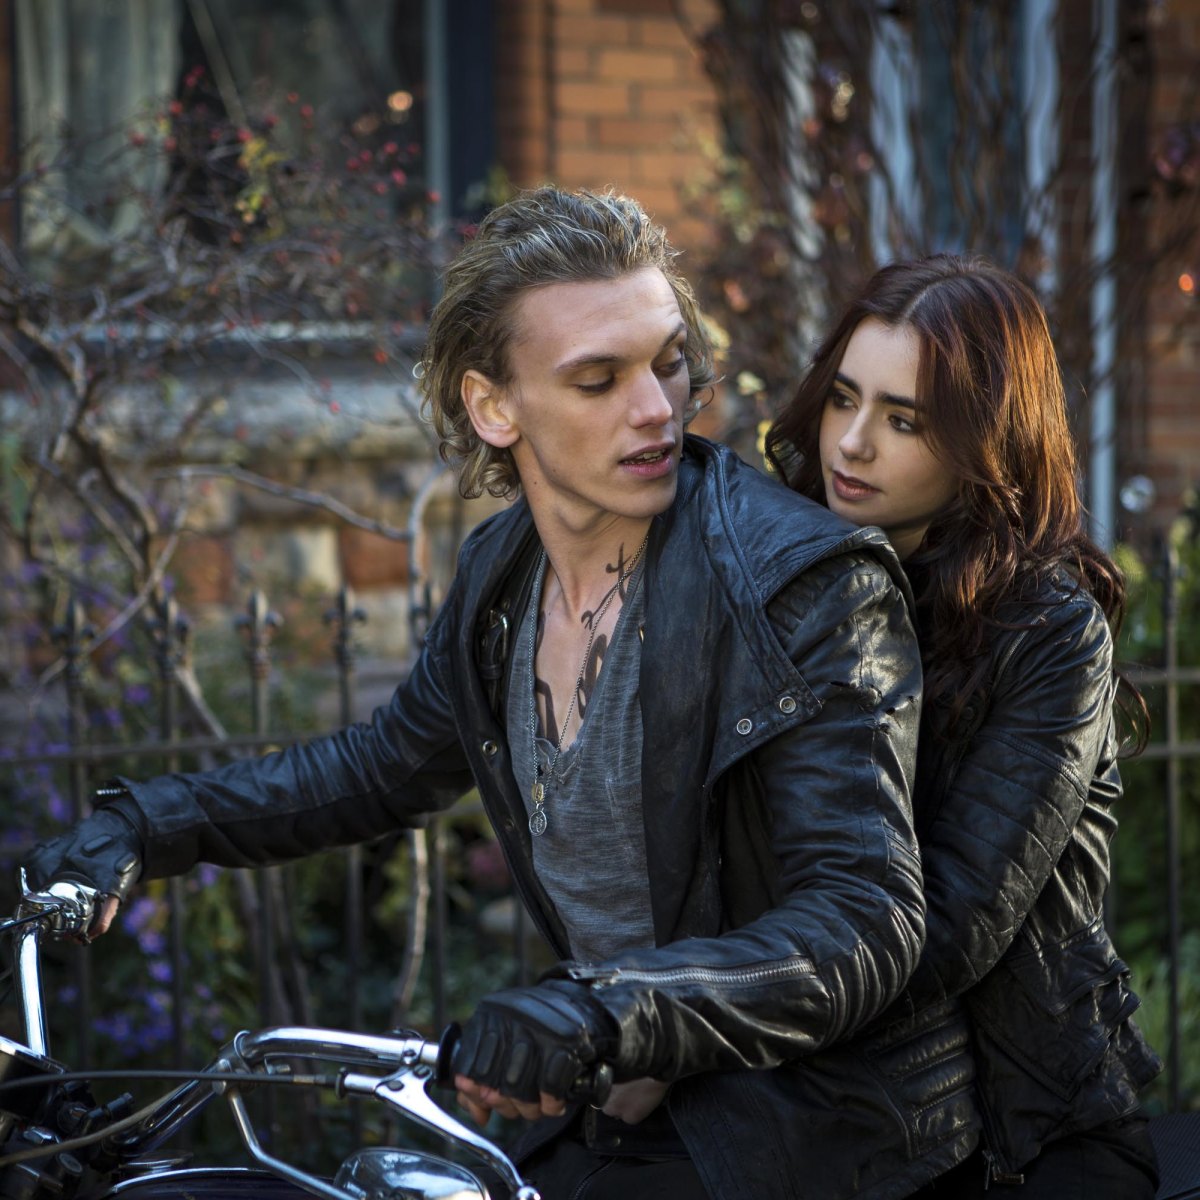 IMDb - #6 Jamie Campbell Bower  You may have seen Jamie Campbell Bower  prior to Stranger Things, in films like Sweeney Todd and the Twilight  saga. But his performance as the